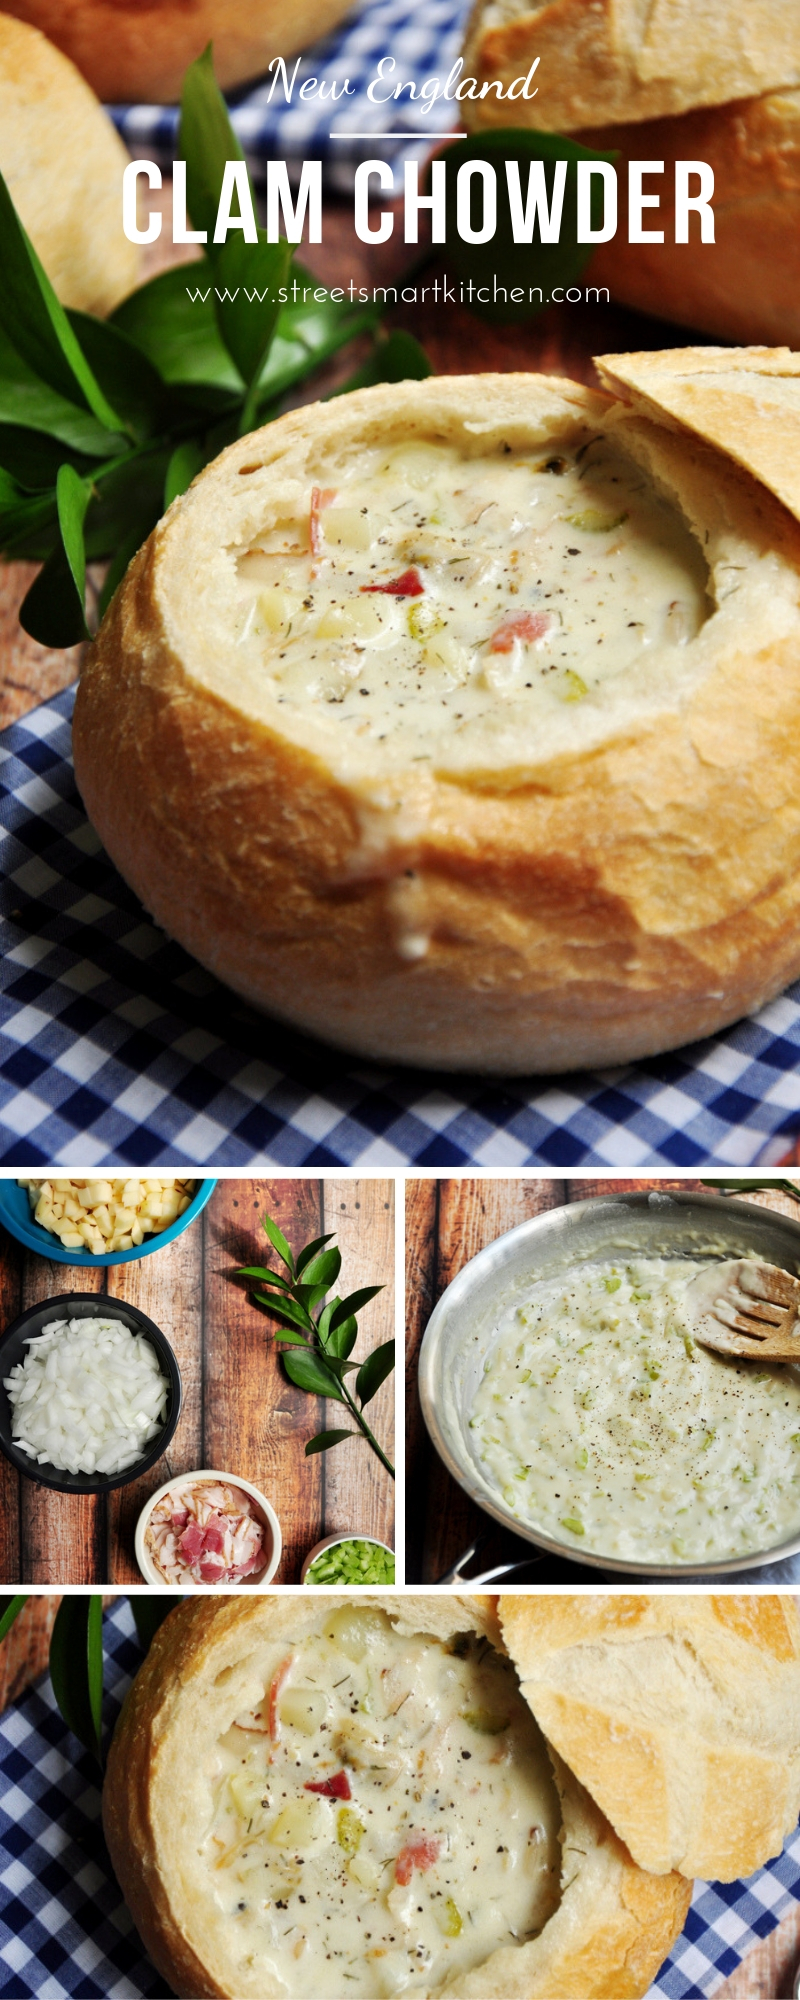 This authentic New England Clam Chowder recipe was recreated after a trip to Boston. Serve it in a bread bowl to make it extra comforting and hearty!